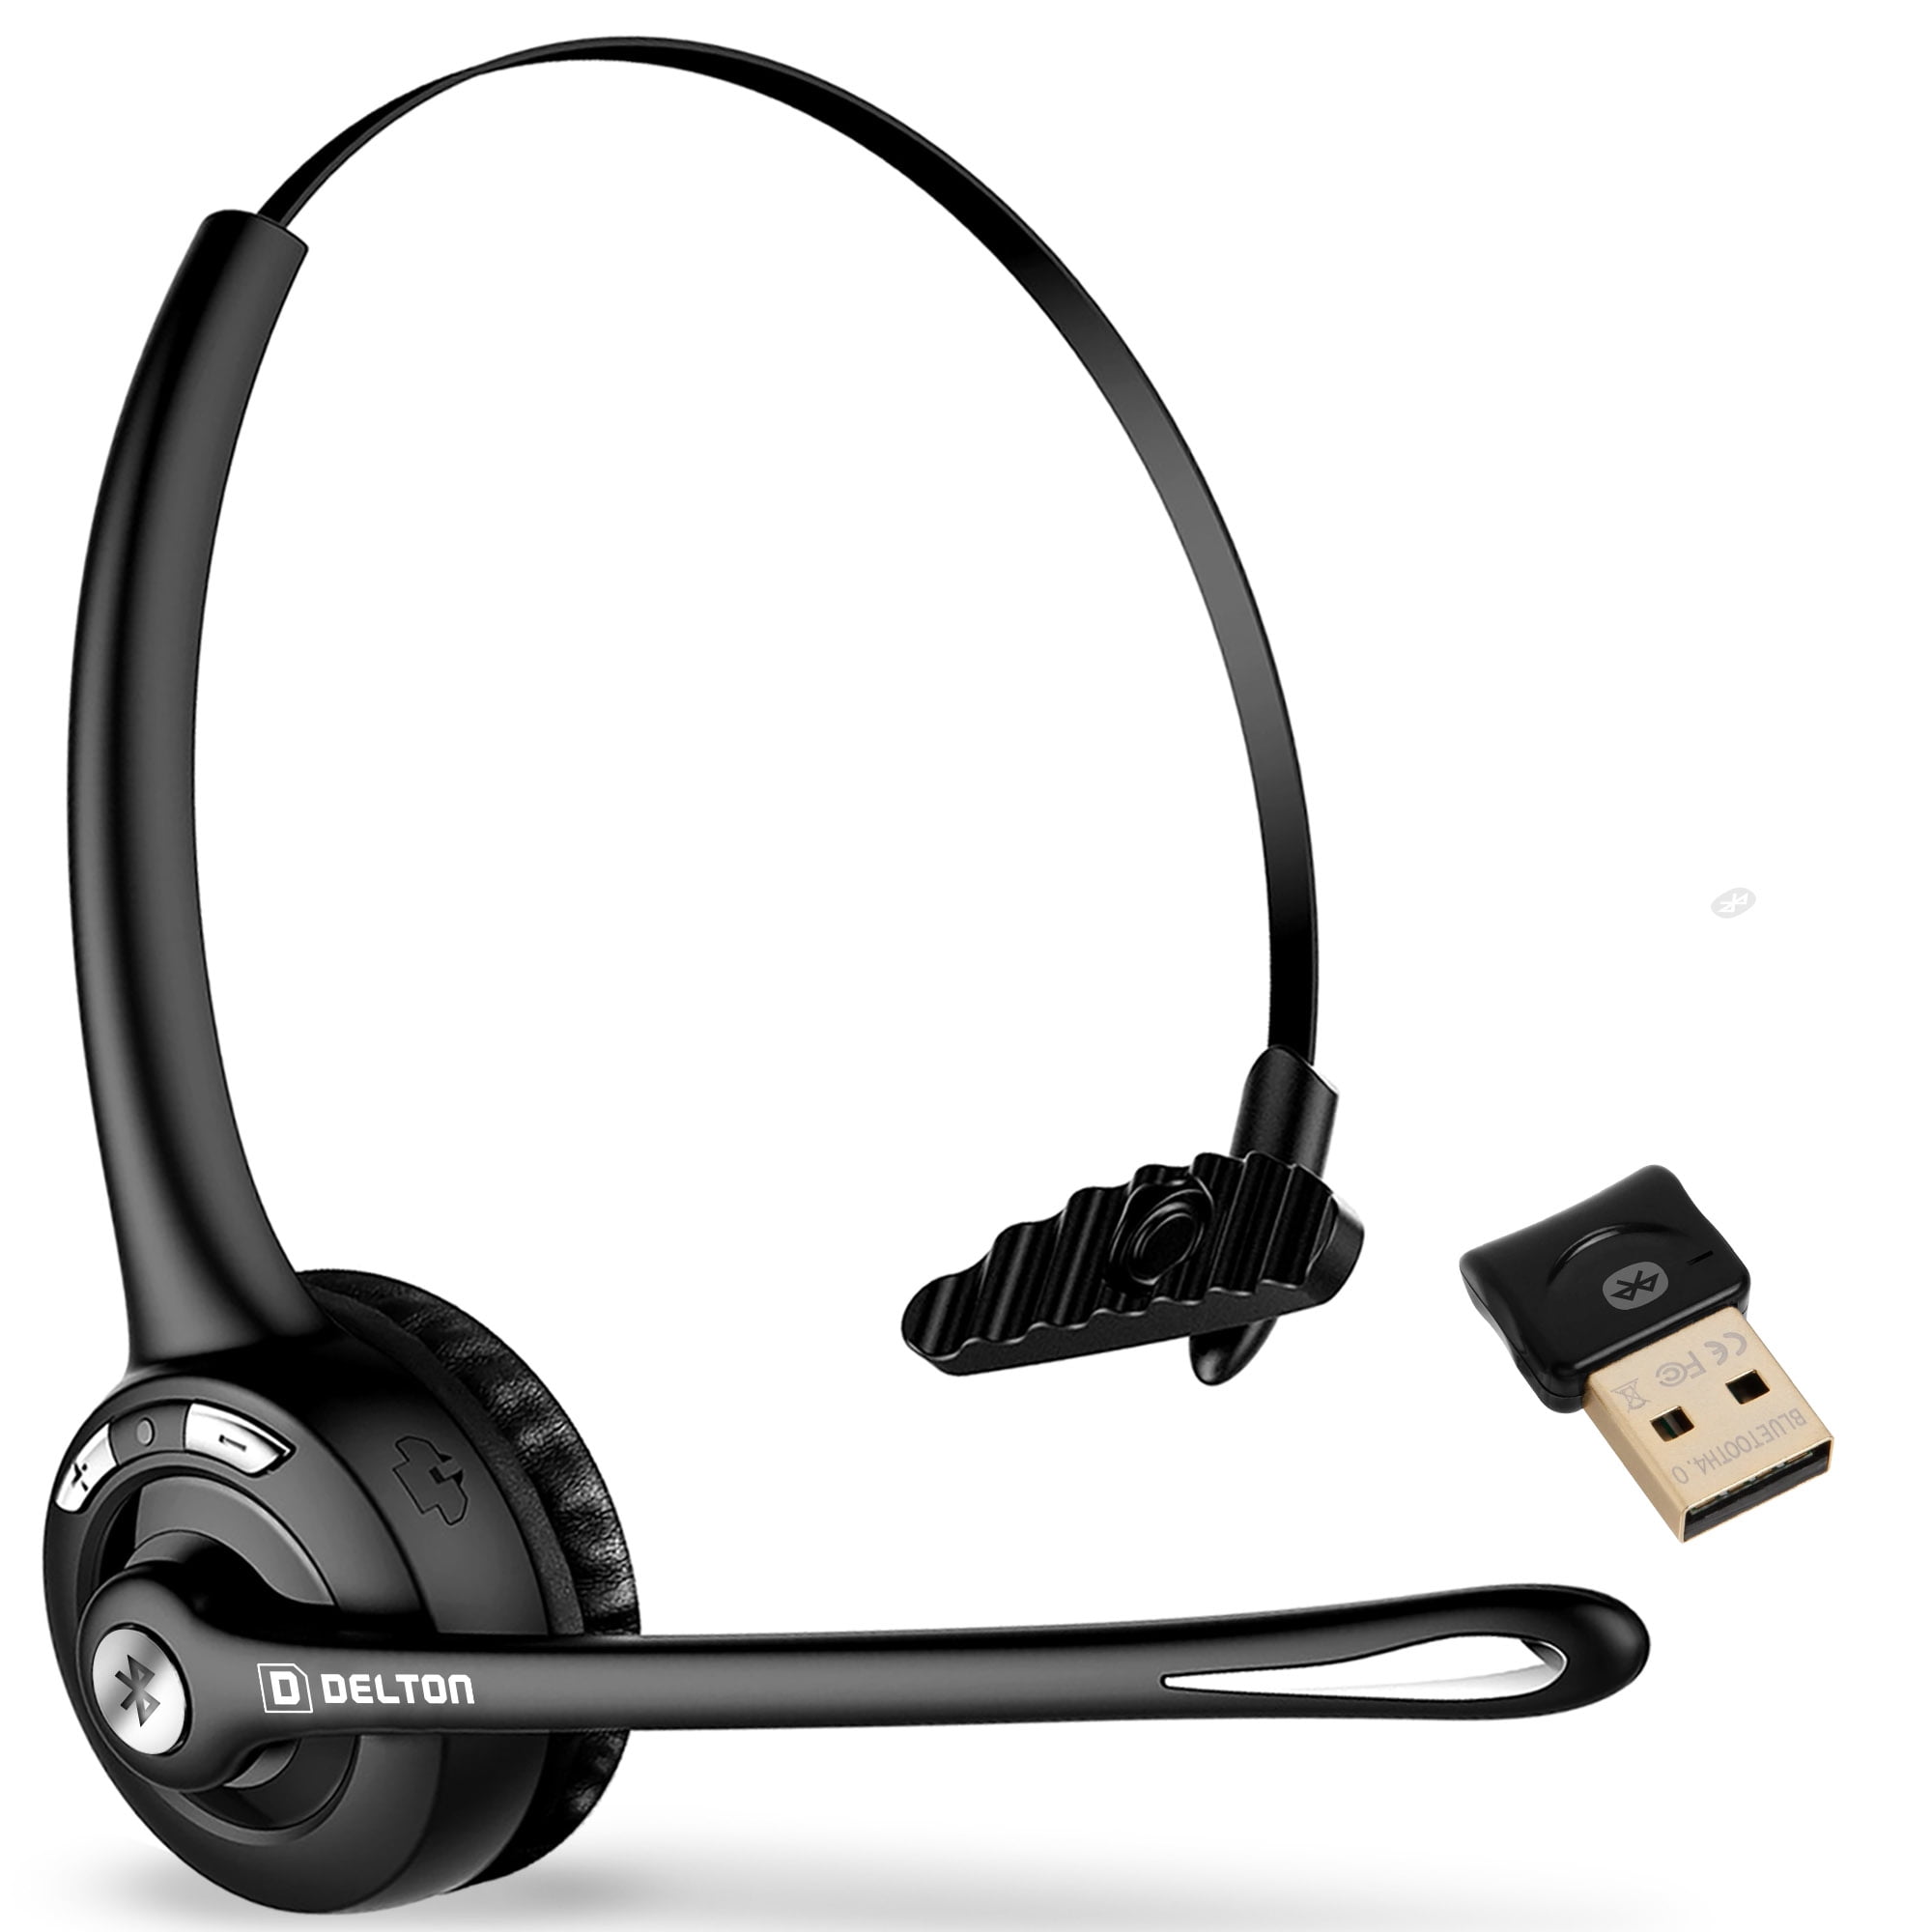 Delton 10X Trucker Headset - Wireless Headphones with Microphone - Over-The-Head Single Earpiece - Ideal for Skype, Call Centers and Truck Drivers - Up to Hours of Battery Life -